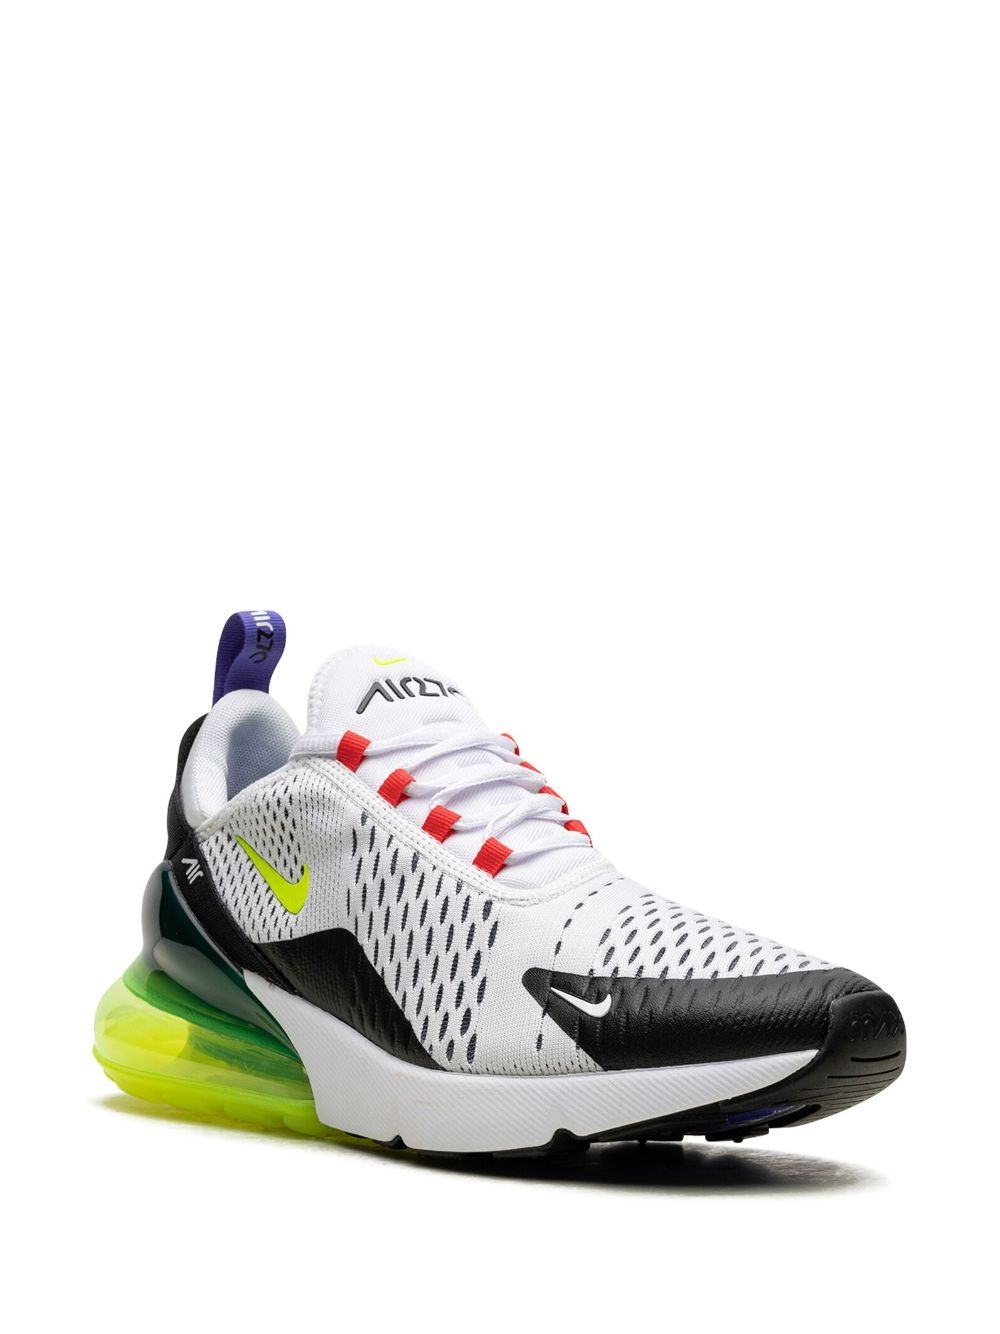 Air Max 270 "White/Volt/Siren Red" sneakers - 2